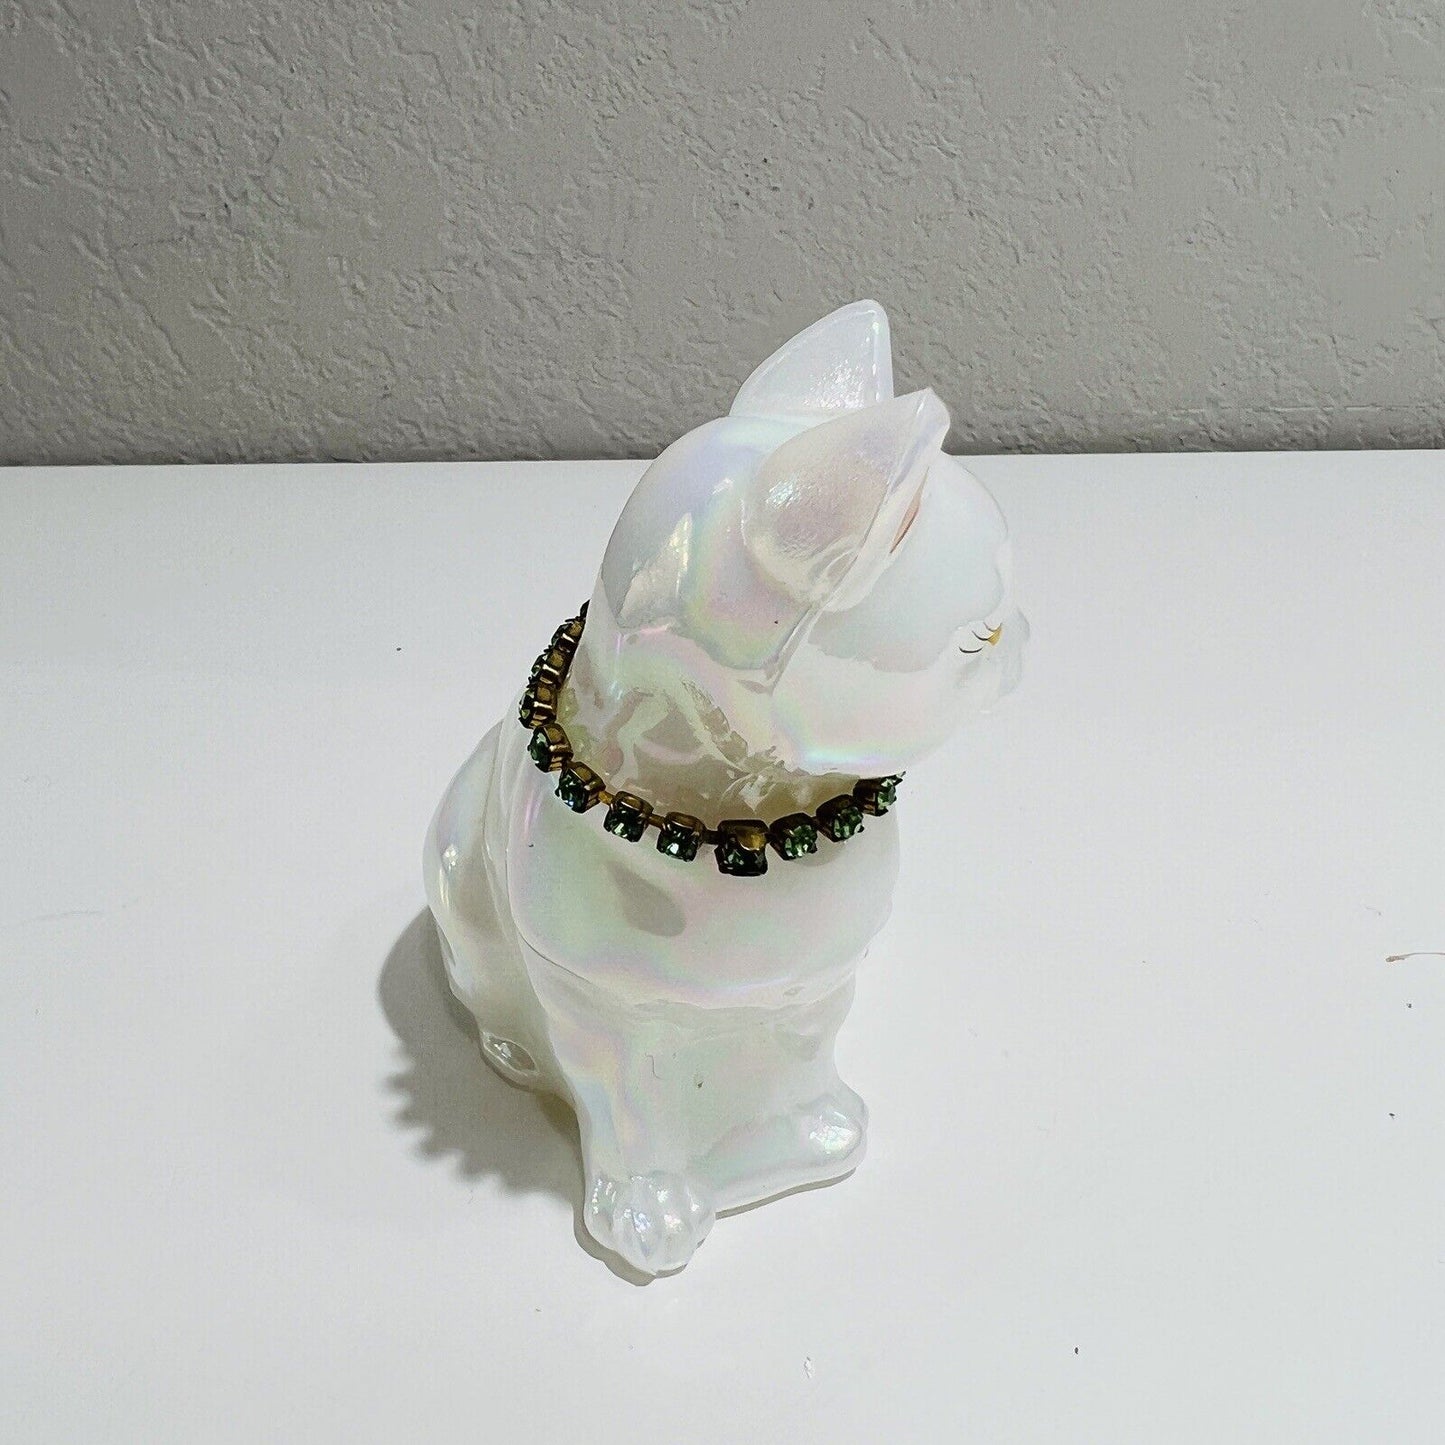 Fenton Cat May Birthstone Art Glass Iridescent White May Figure Signed by Artist